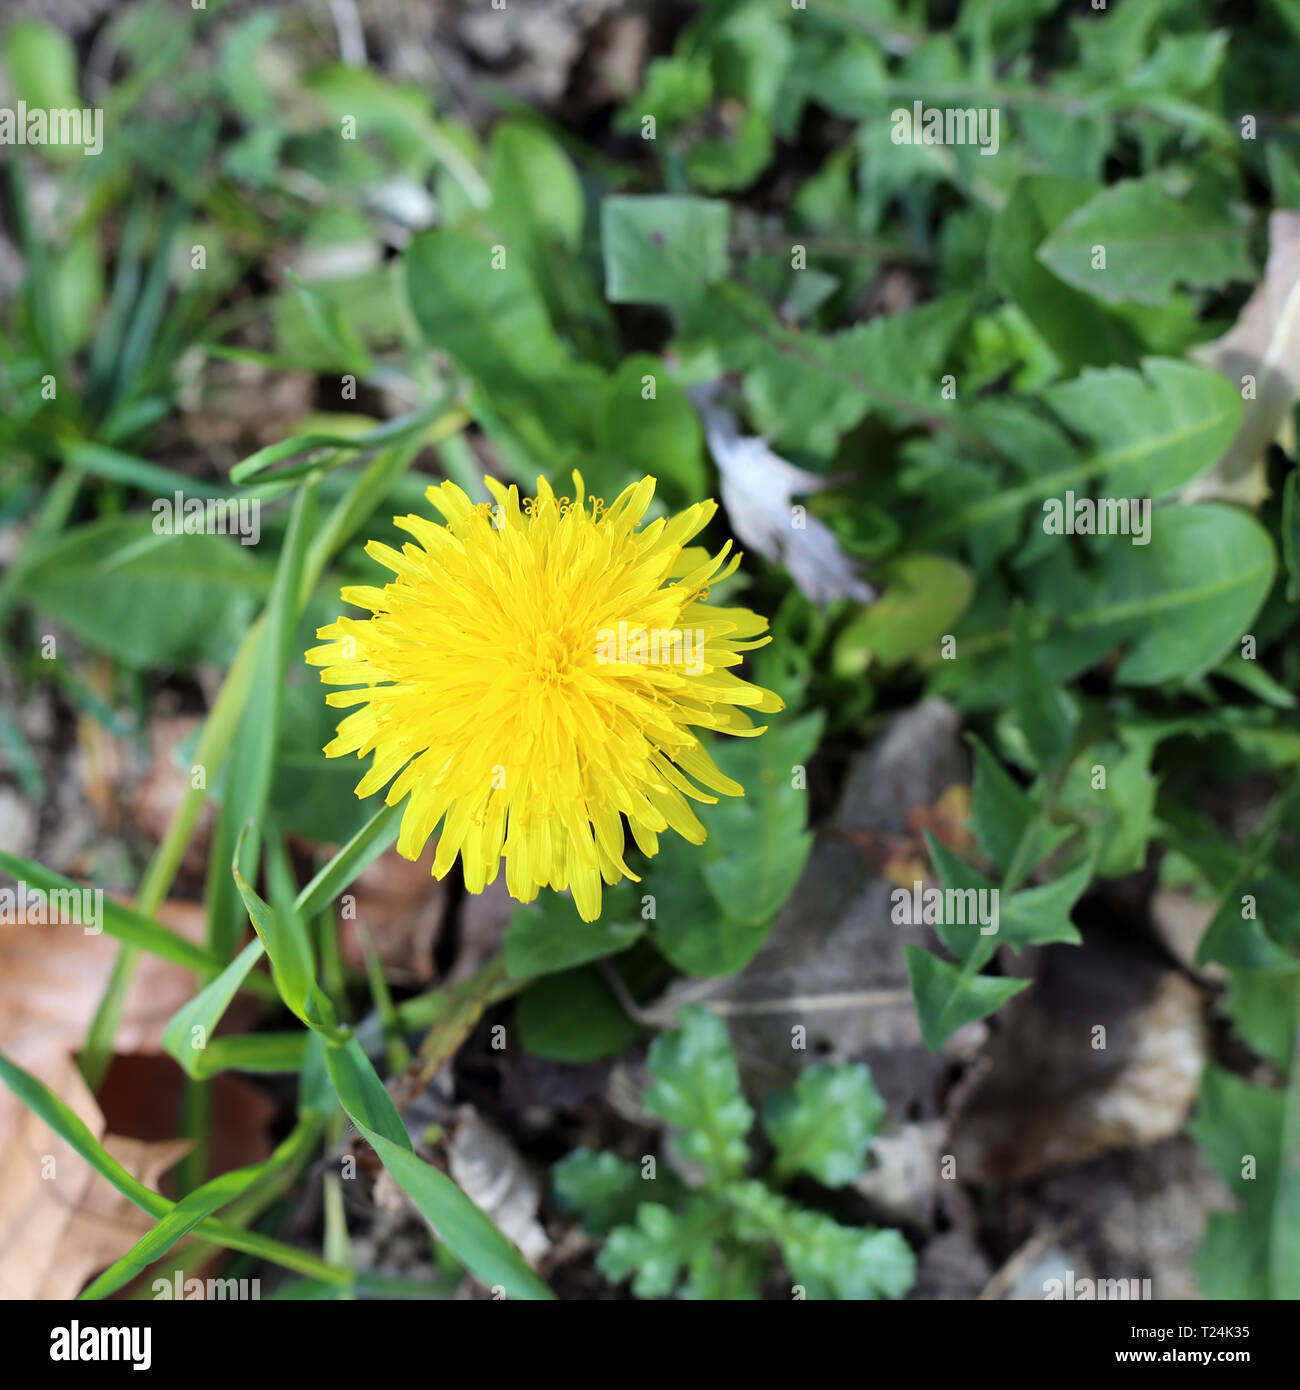 One blooming dandelion in a green meadow. Closeup photo. The flower has love deep yellow color and is surrounded by different green plants. Stock Photo